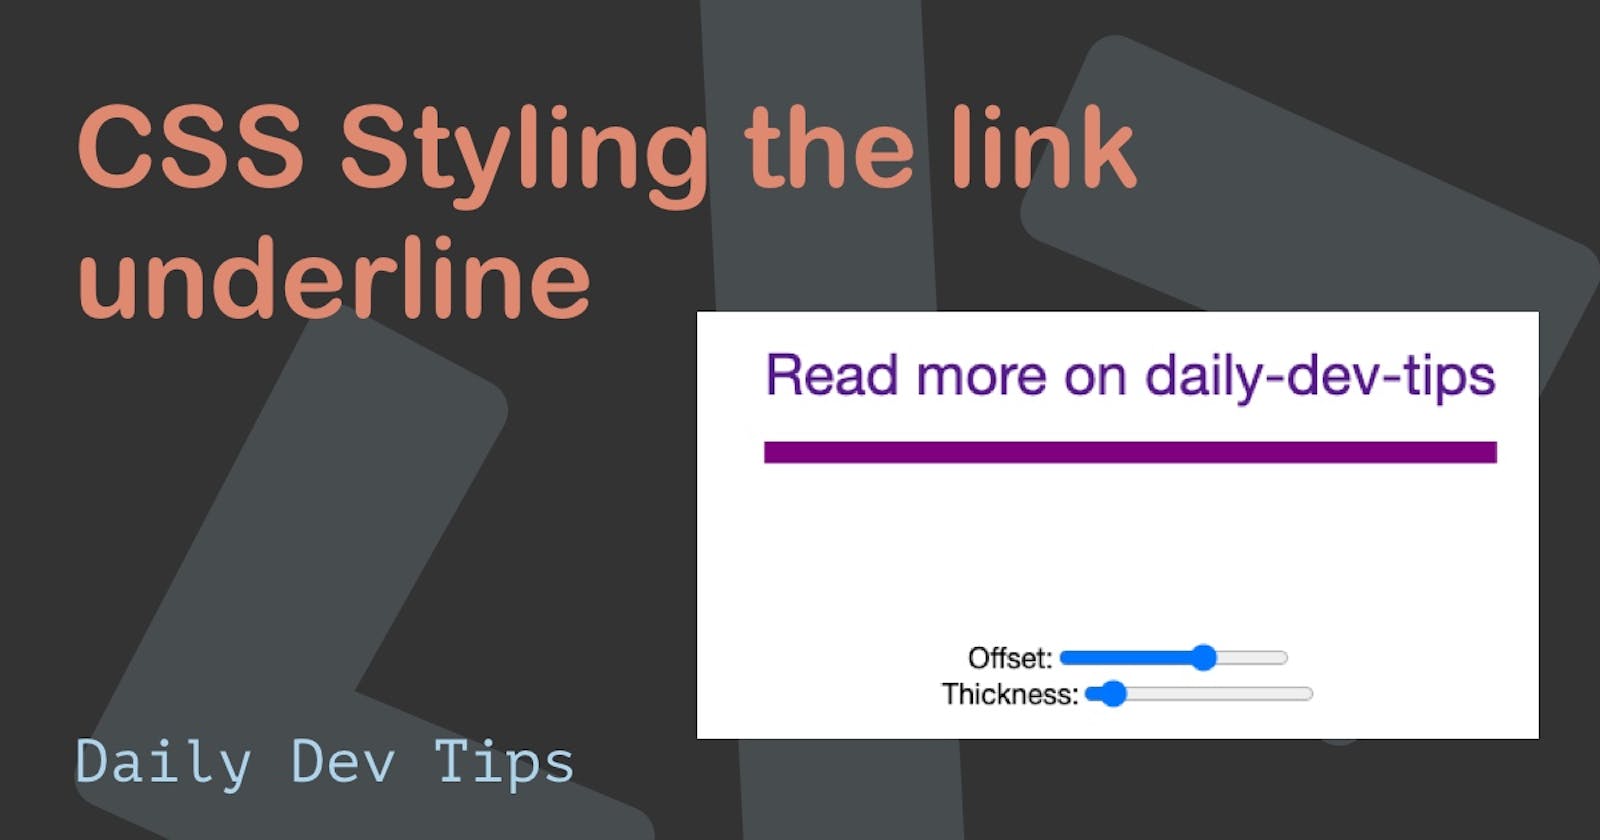 CSS Styling the link underline